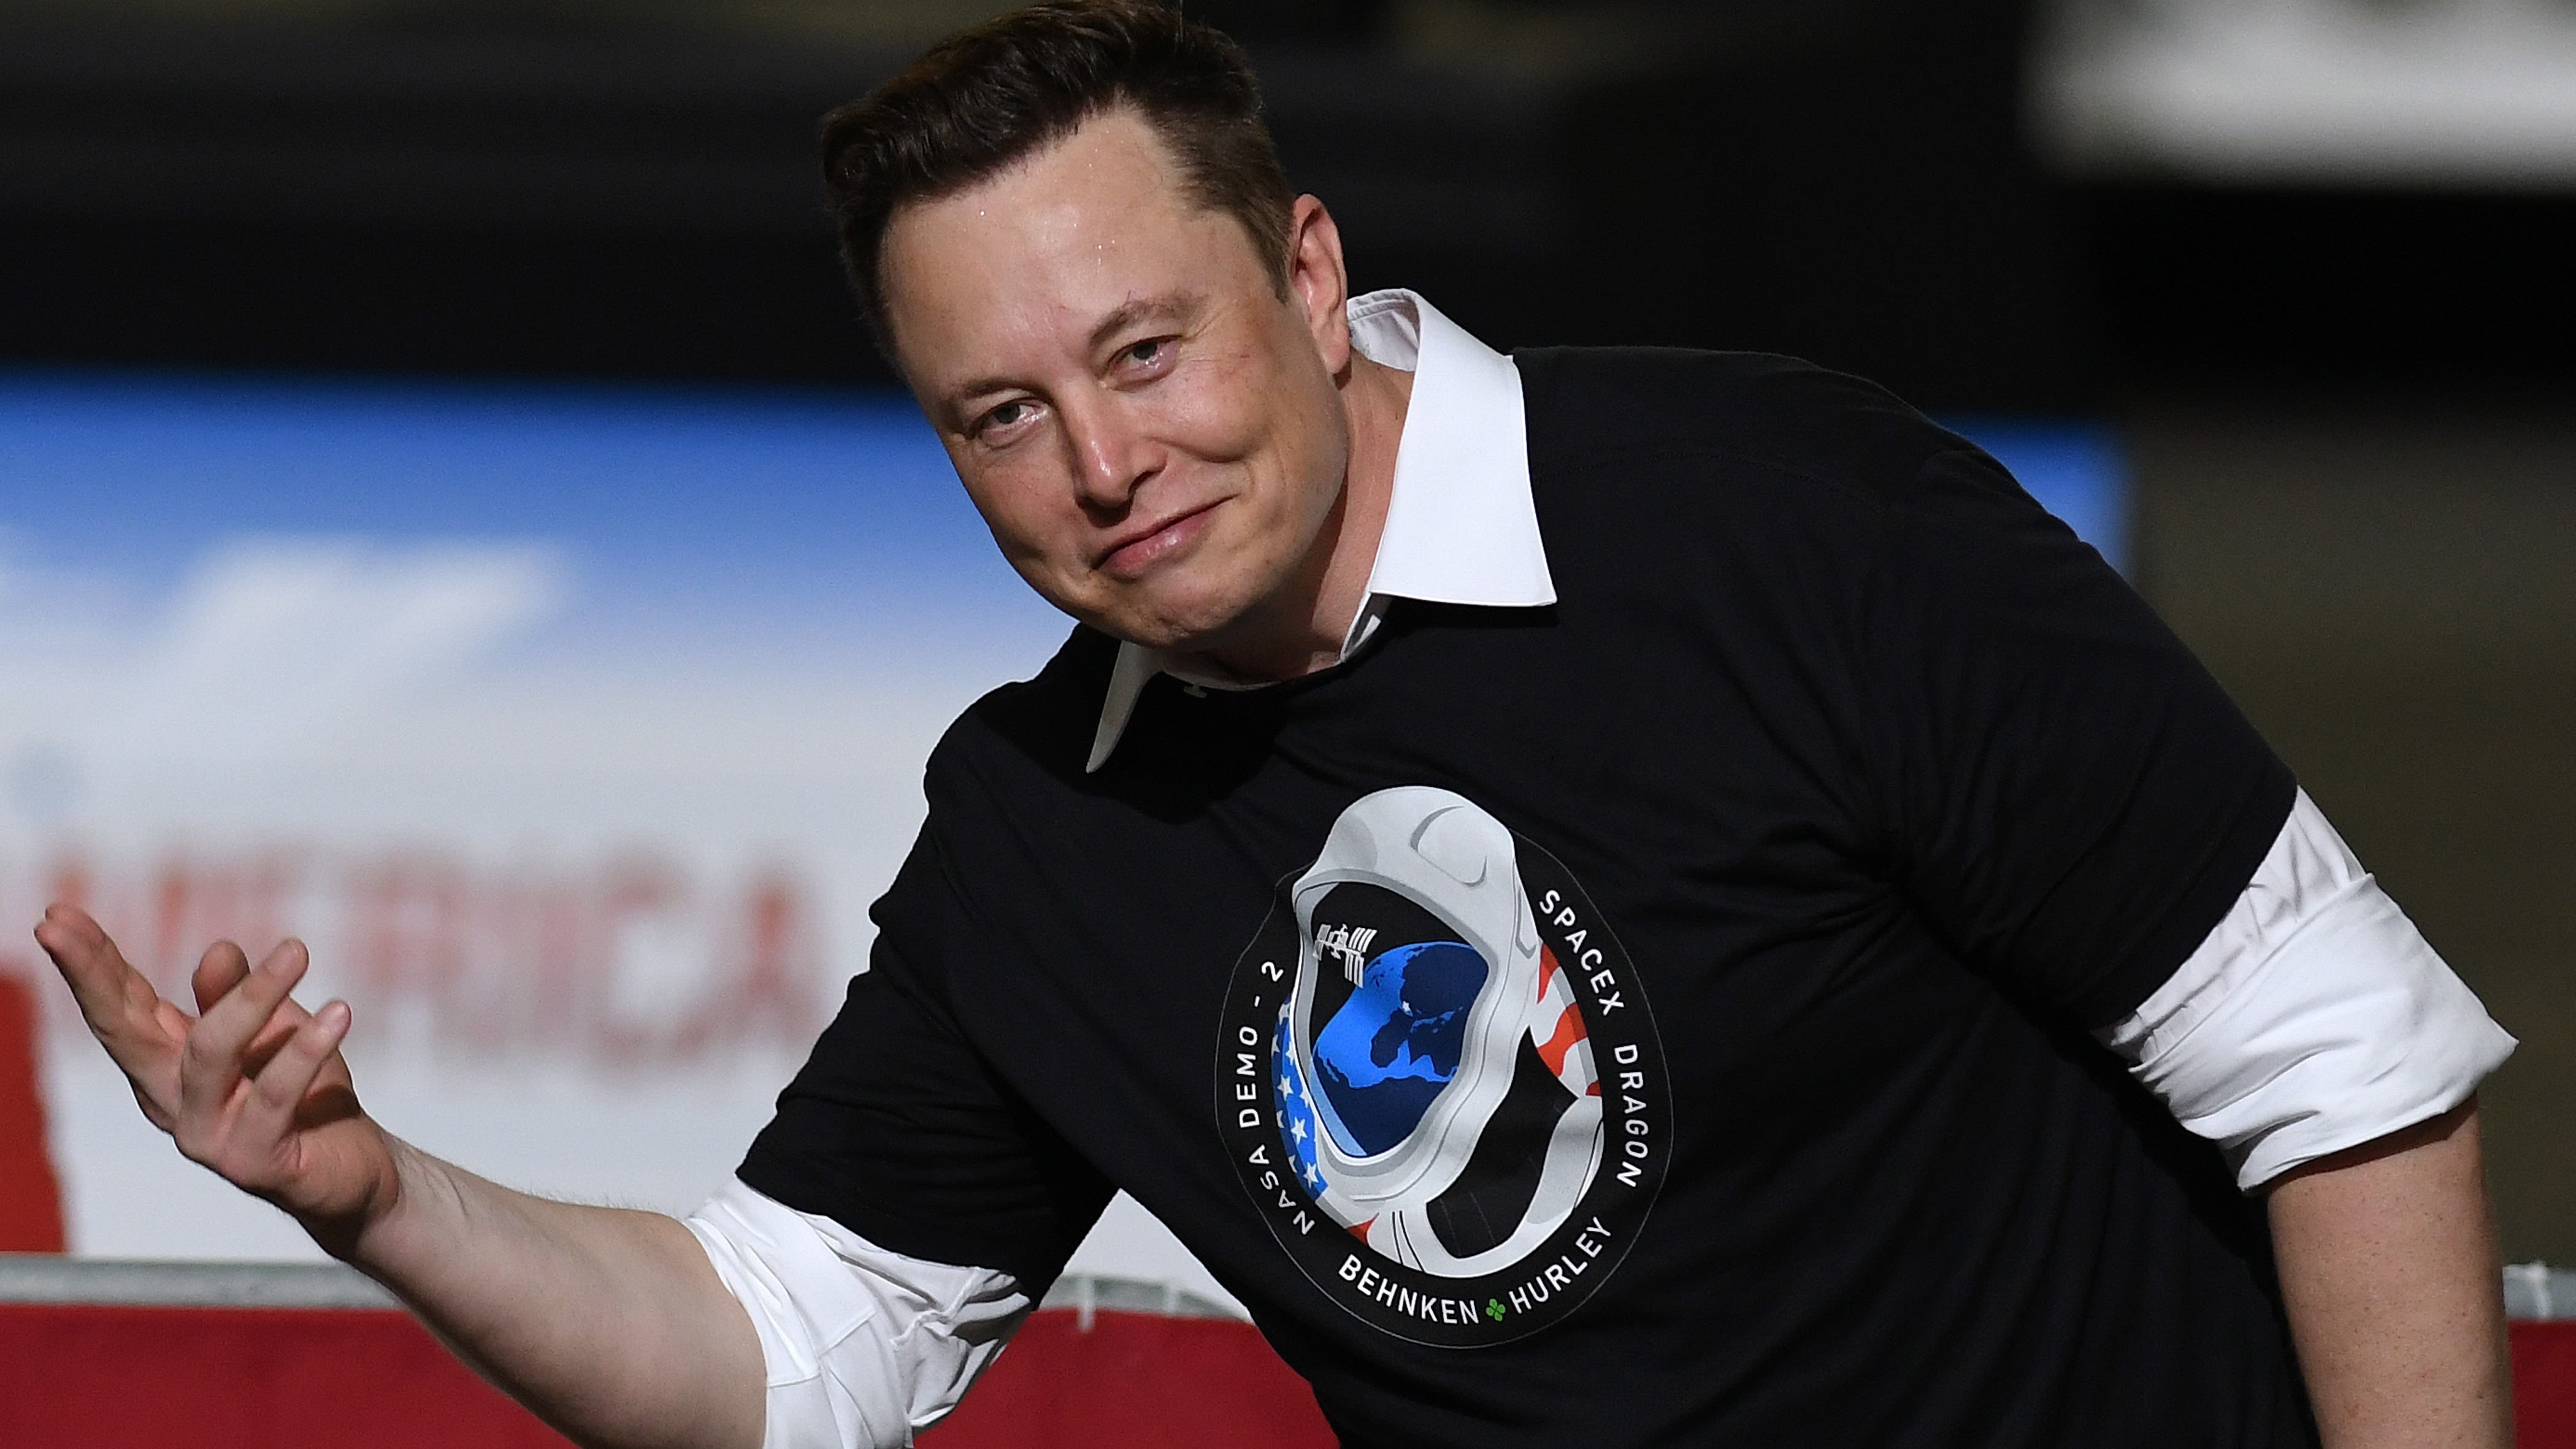 Elon Musk says he'll move SpaceX headquarters to Texas over new California LGBTQ+ law